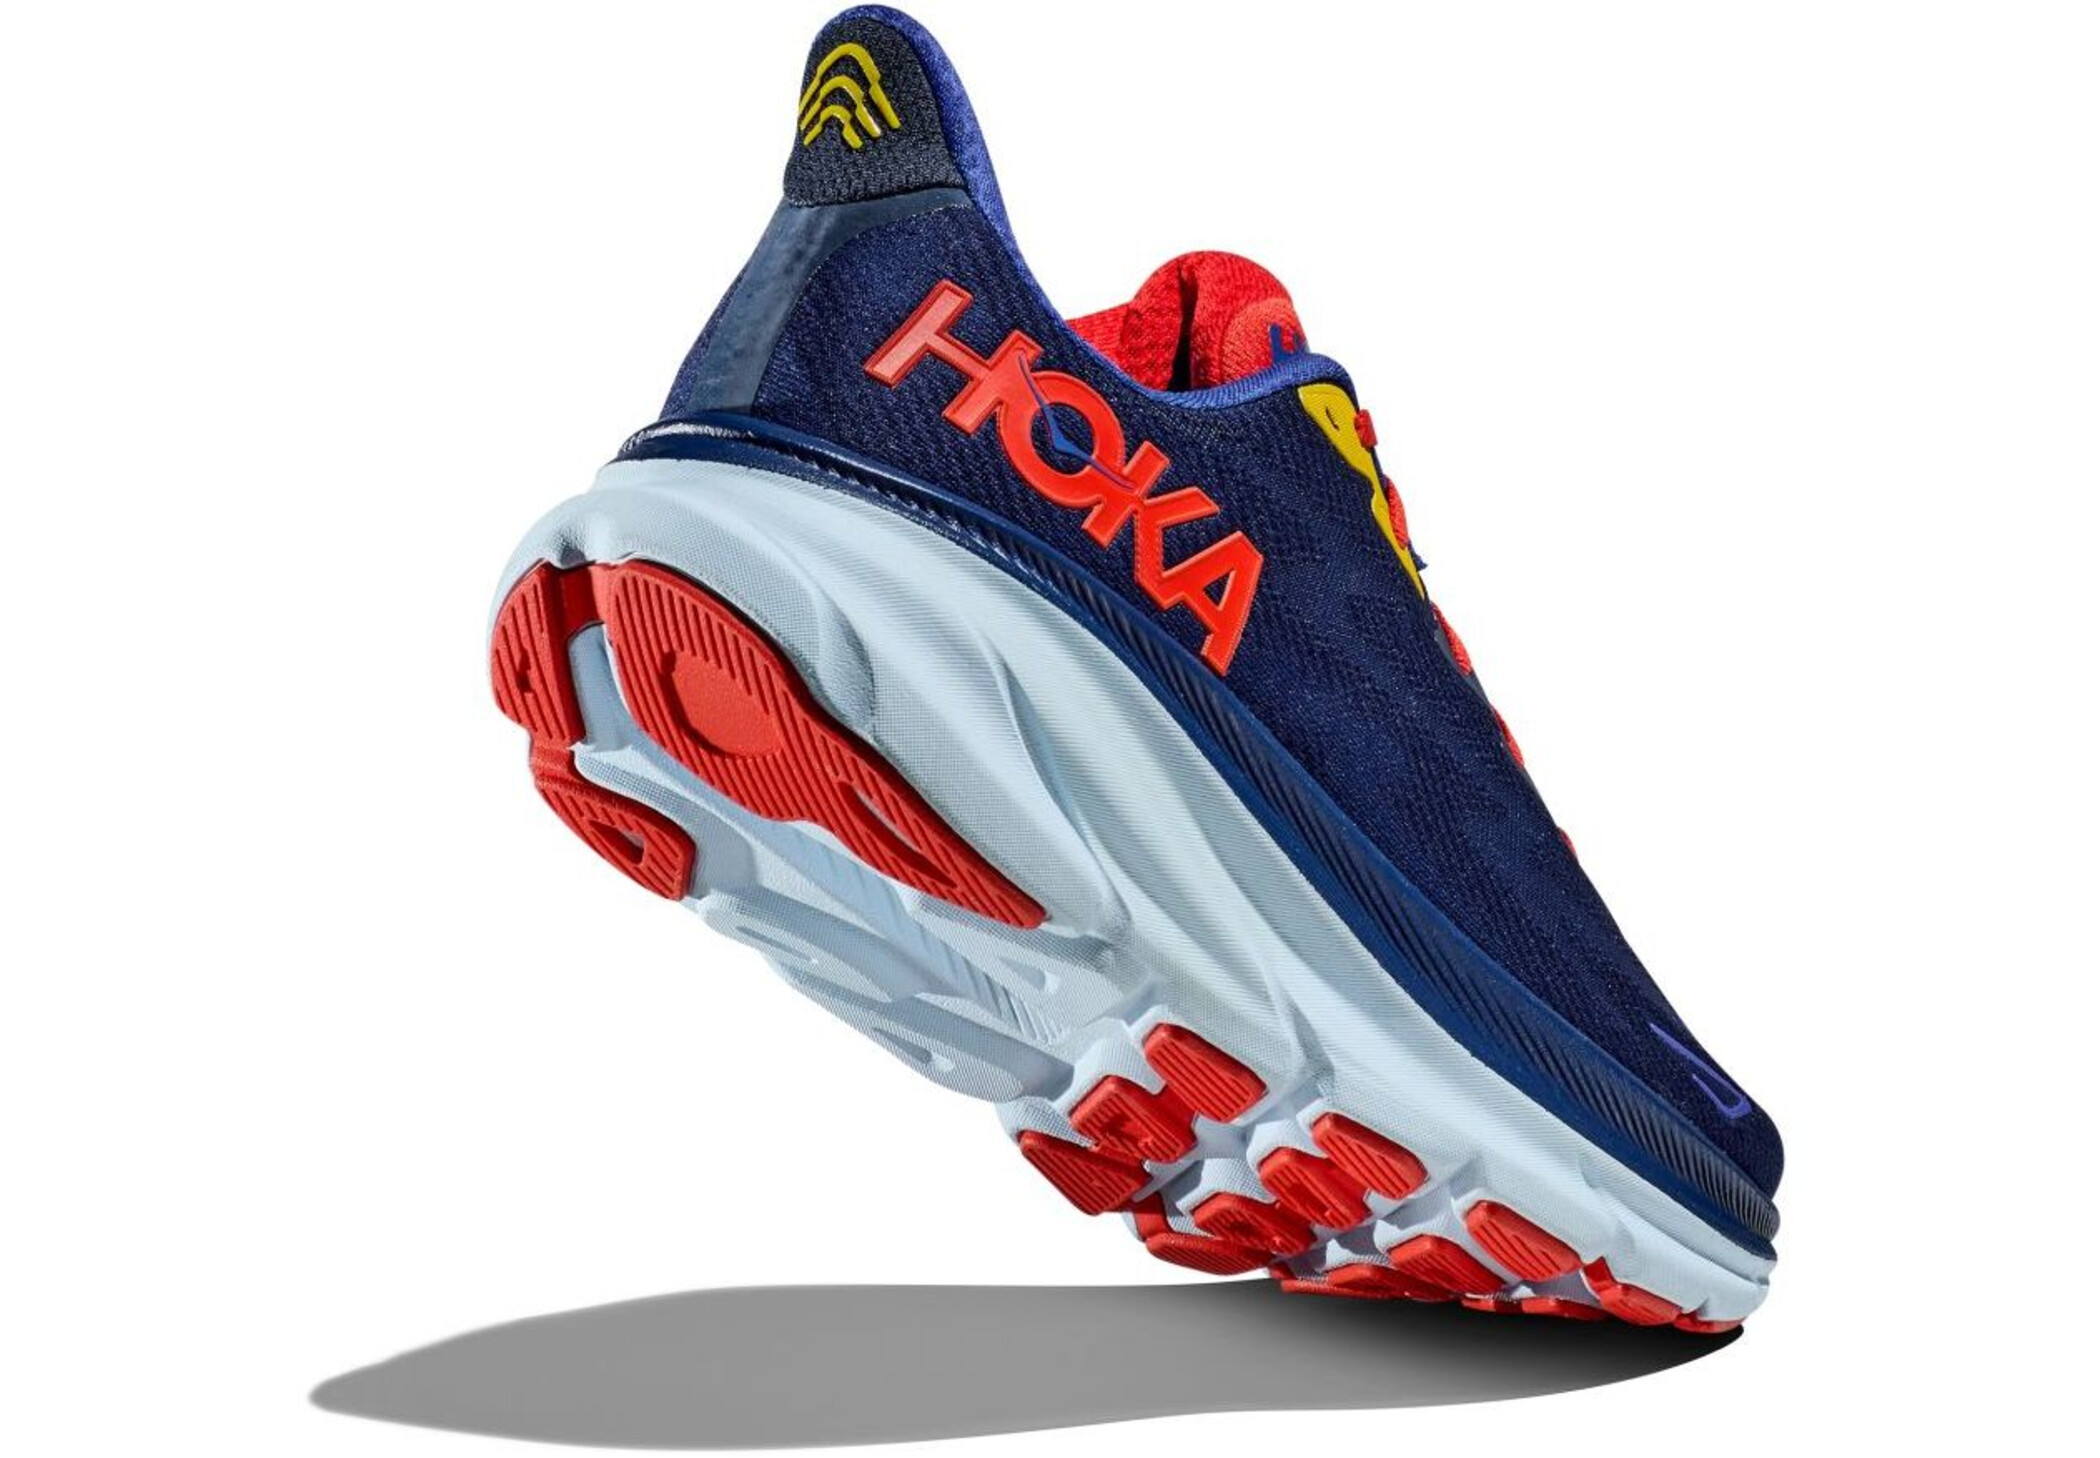 Hoka One One Clifton 9 Running Shoes Men bellwether blue/dazzling blue